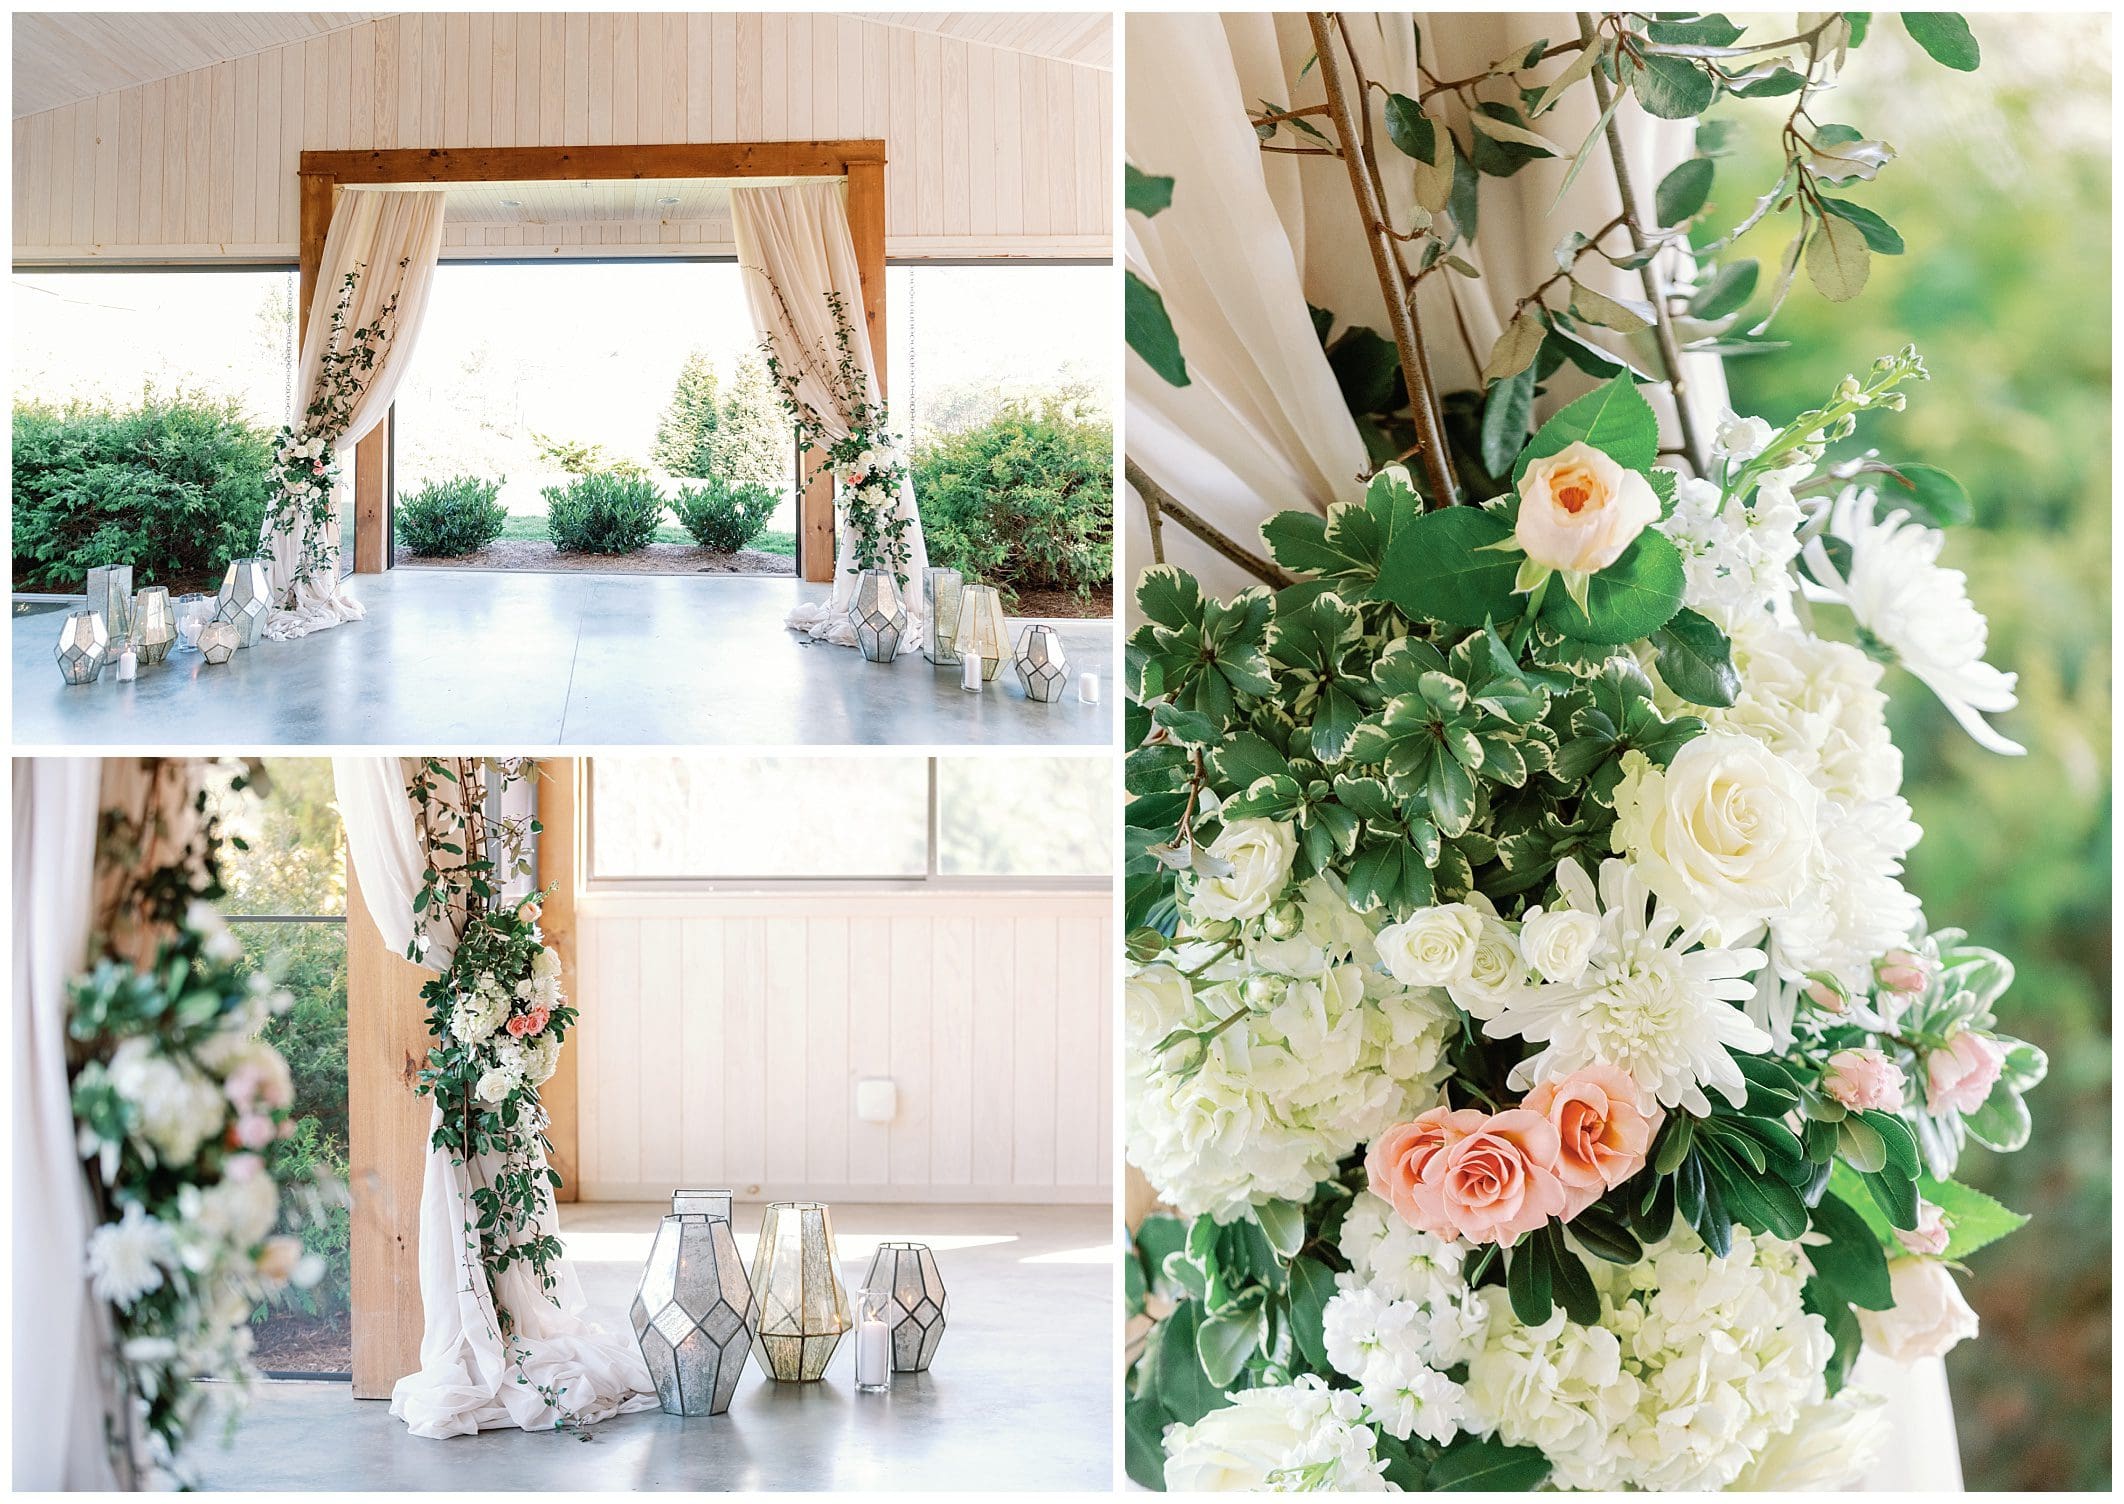 A wedding ceremony set up with flowers and greenery.